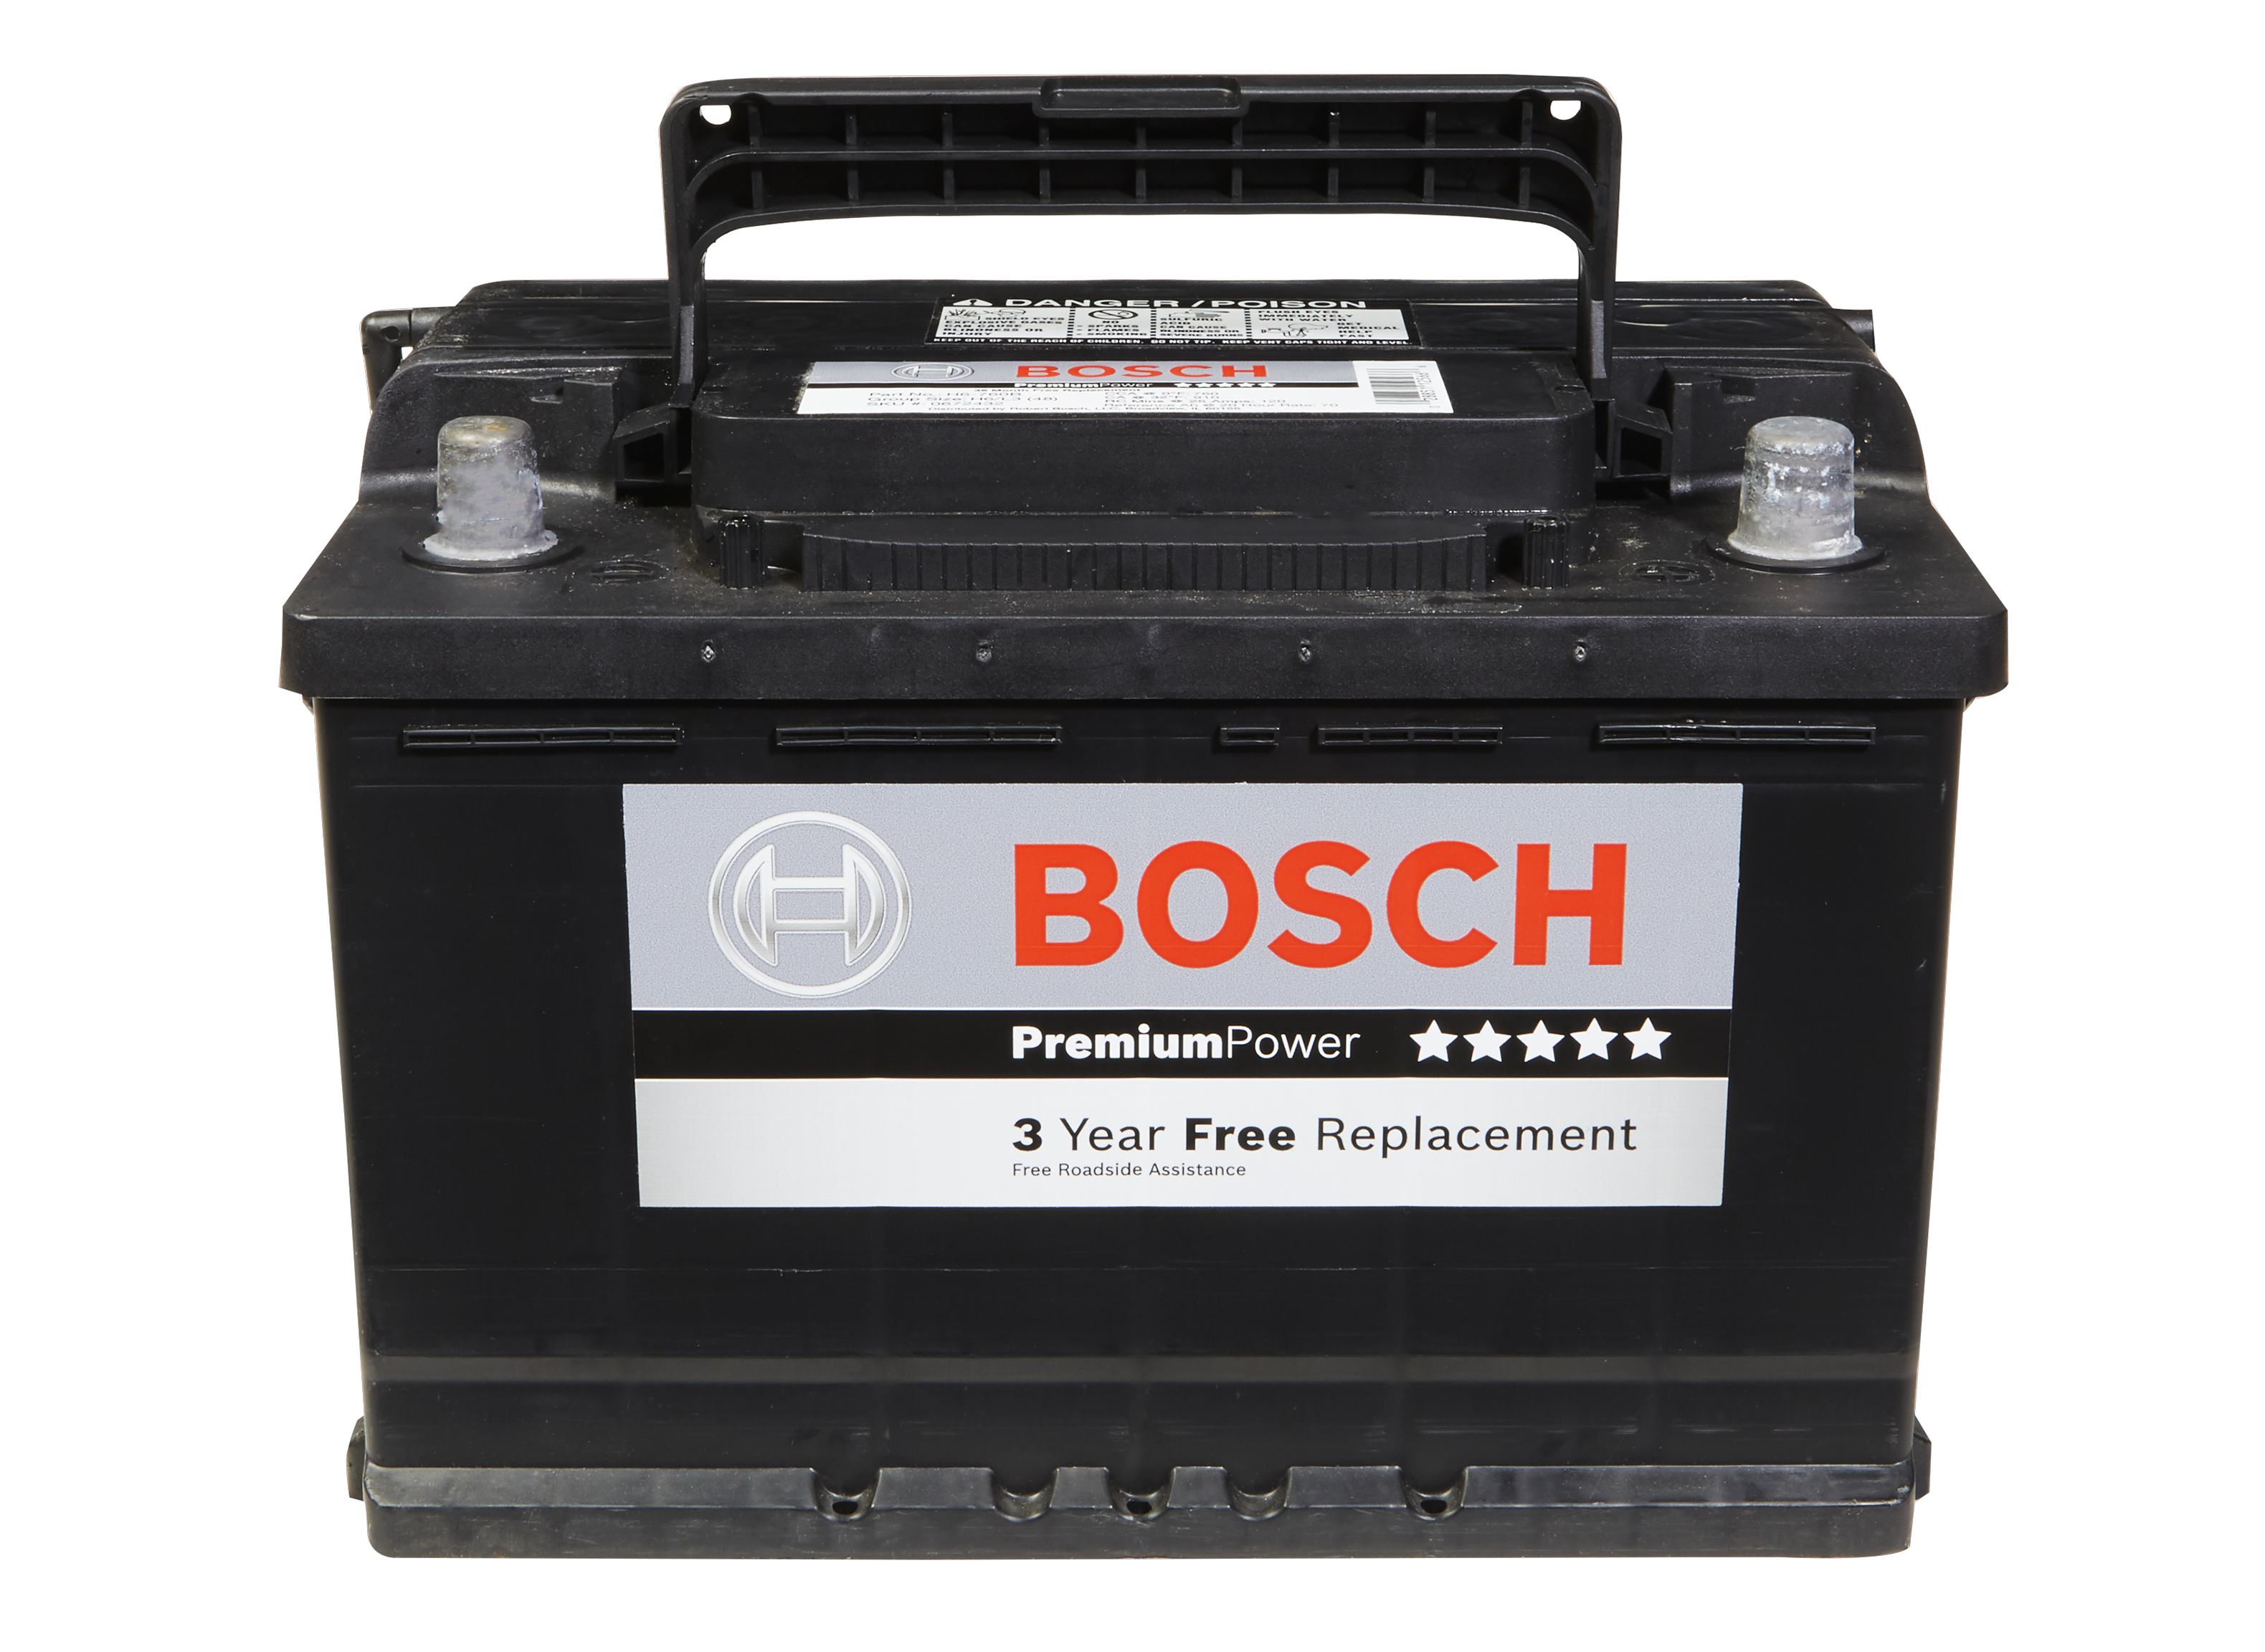 Bosch H6-760B Car Battery Review - Consumer Reports